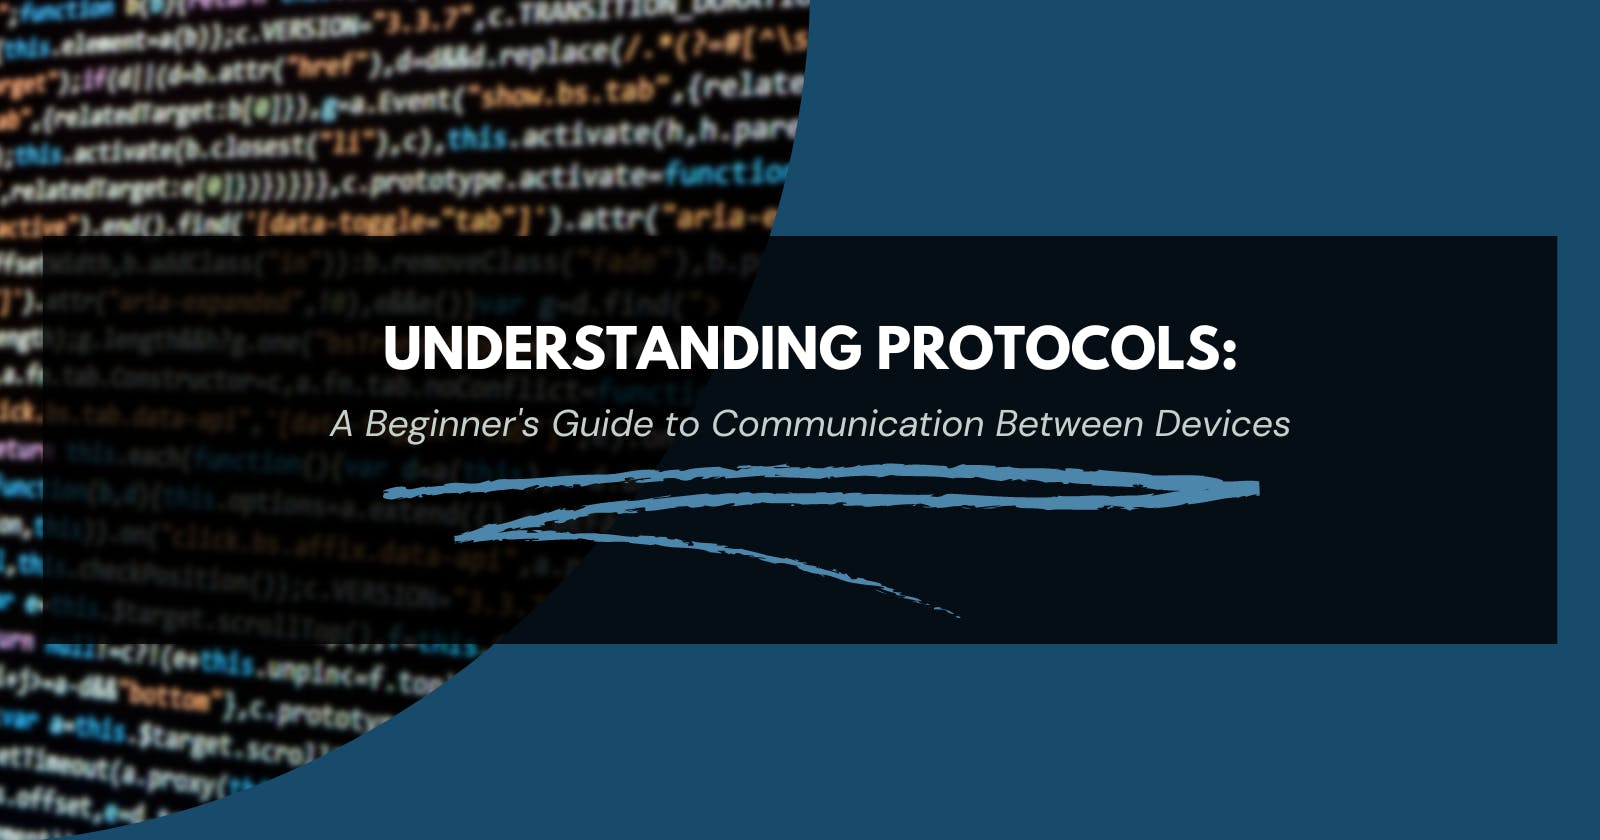 Let's learn about Protocols today,